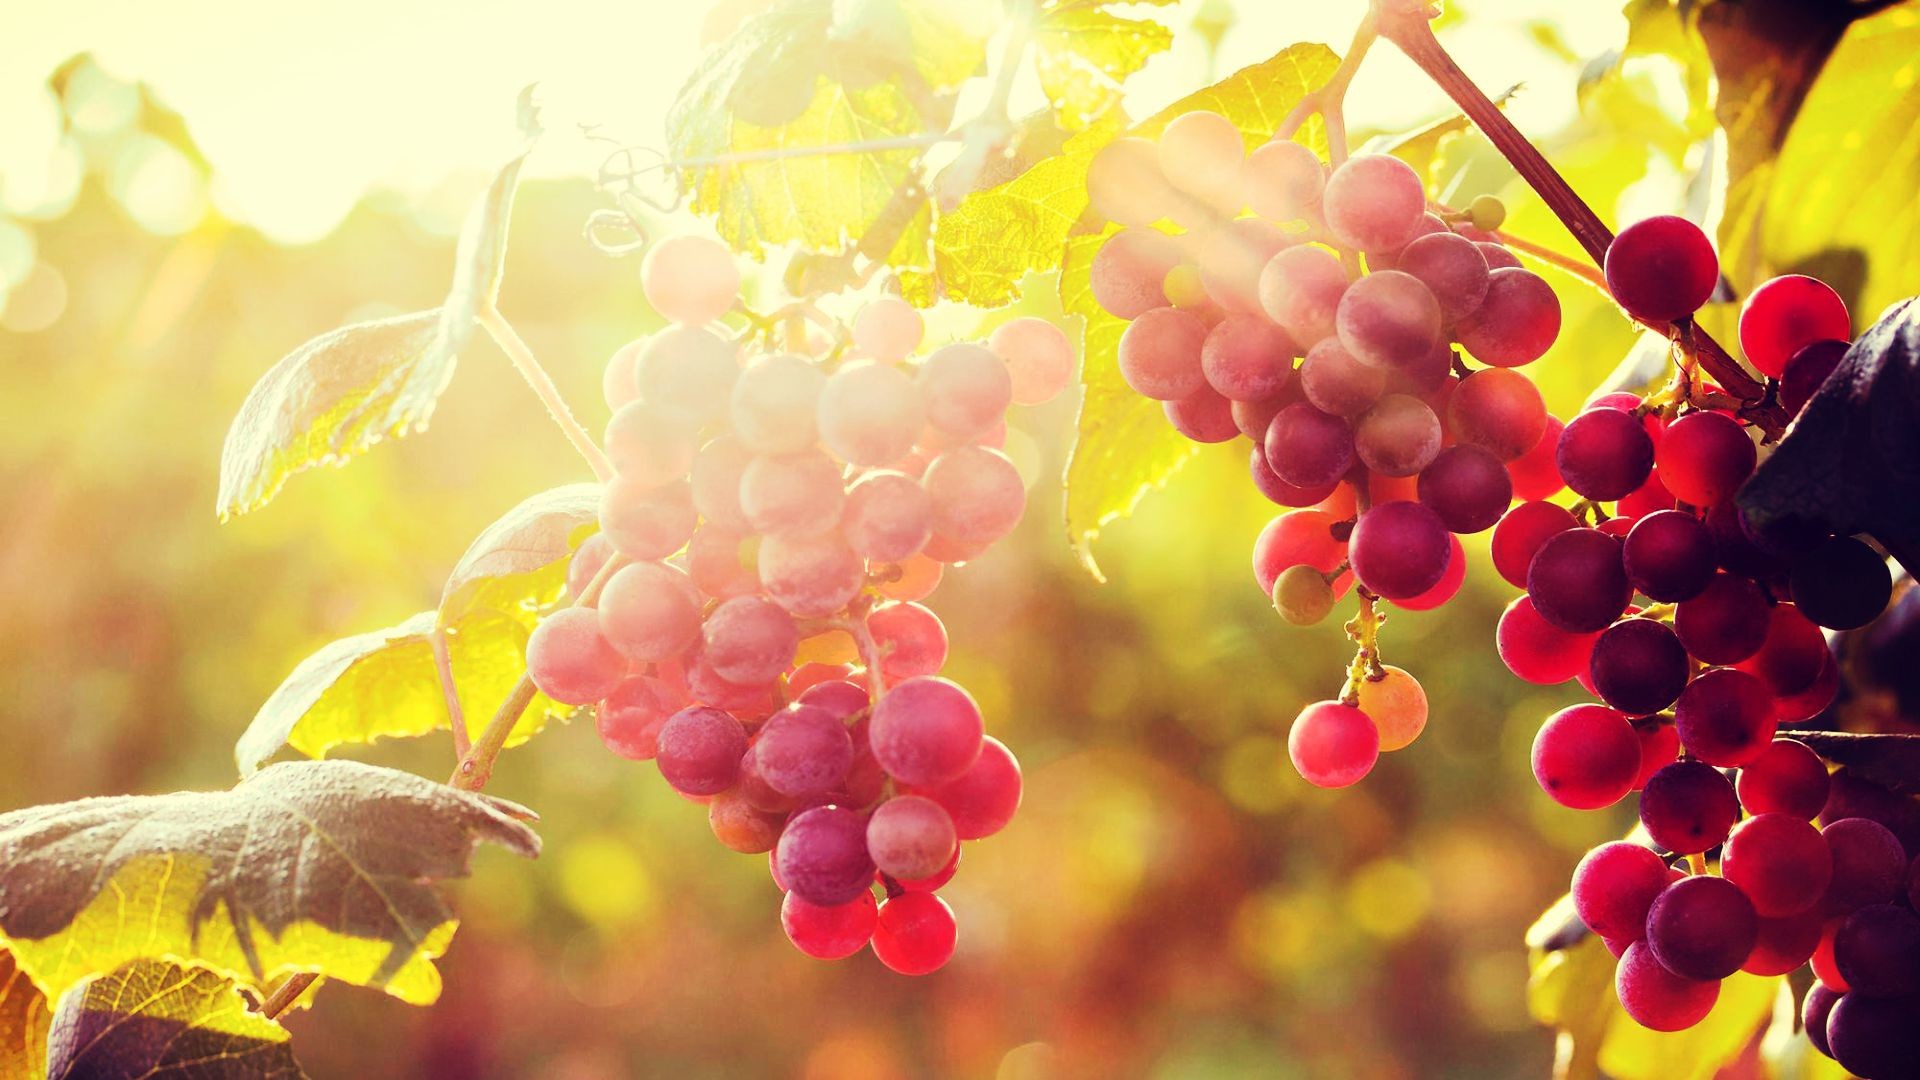 1920x1080 8 Sun-with-Grapes-Wallpaper-Android-1024x576